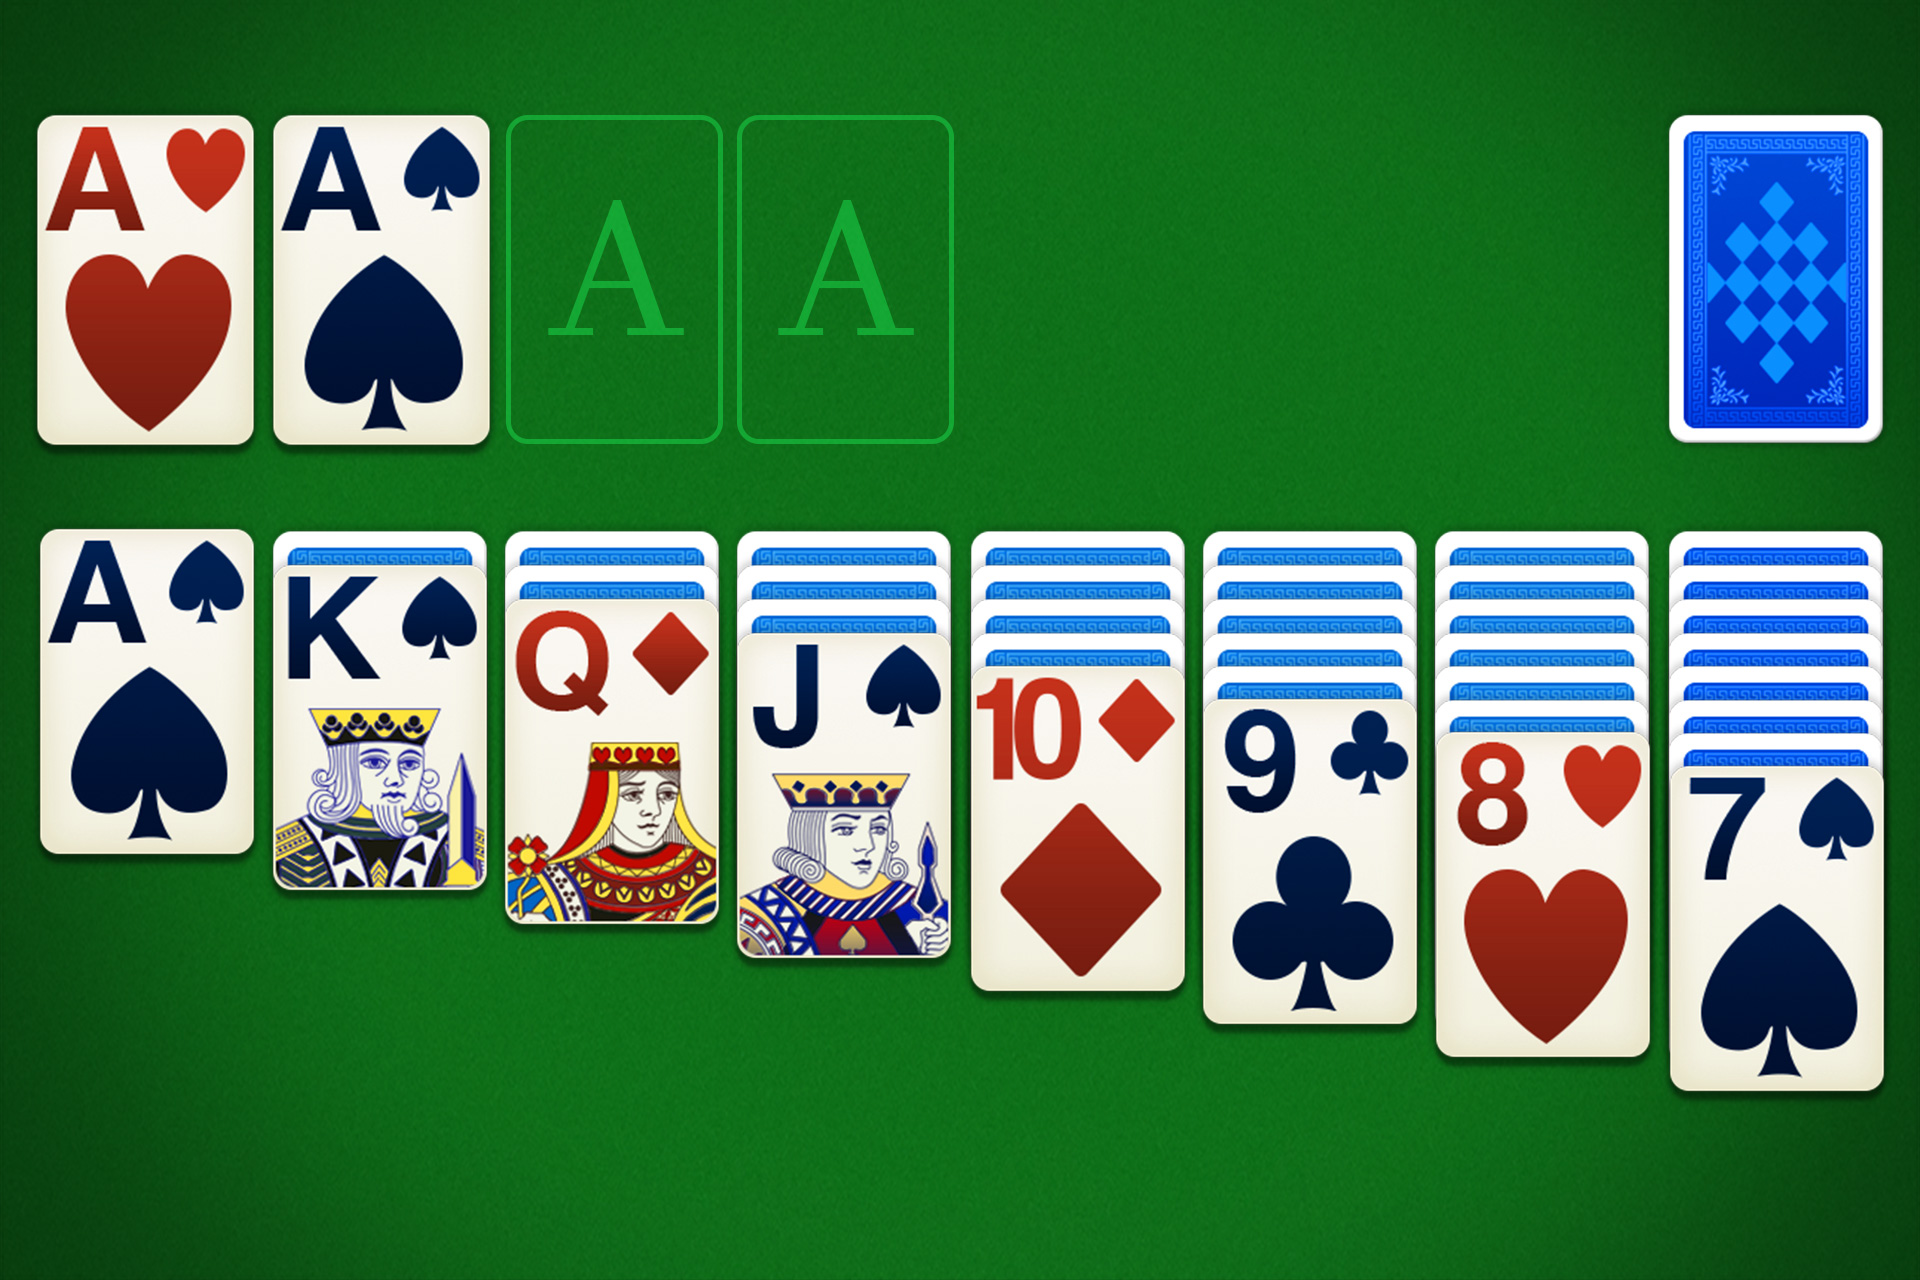 aa - Play aa Online for Free on